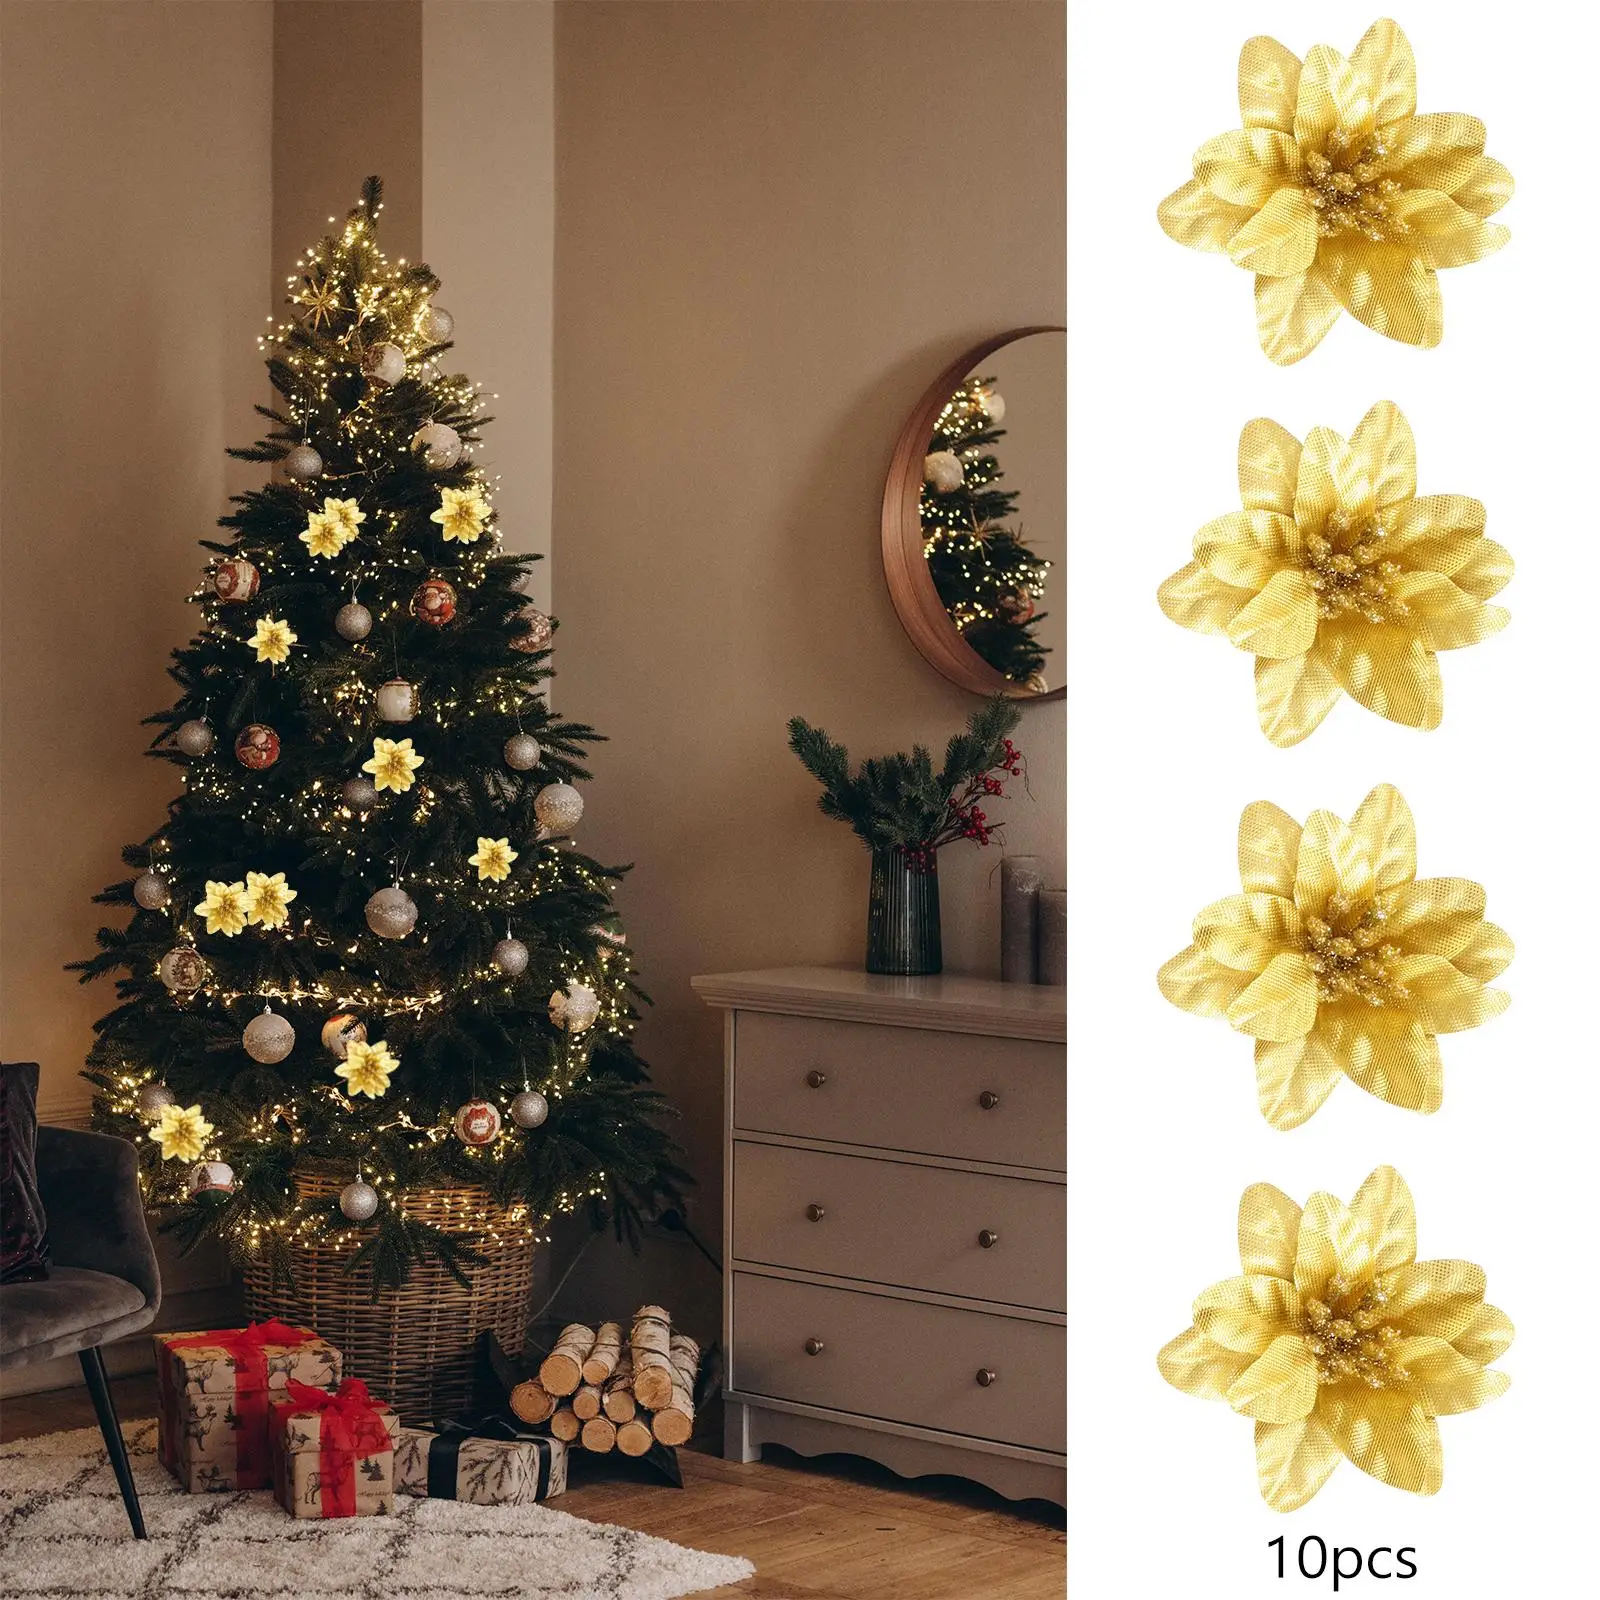 10Pcs Glitter Christmas Flowers Artificial Flowers Christmas Tree Decoration Xmas Tree Ornaments for New Year Garland DIY Wreath